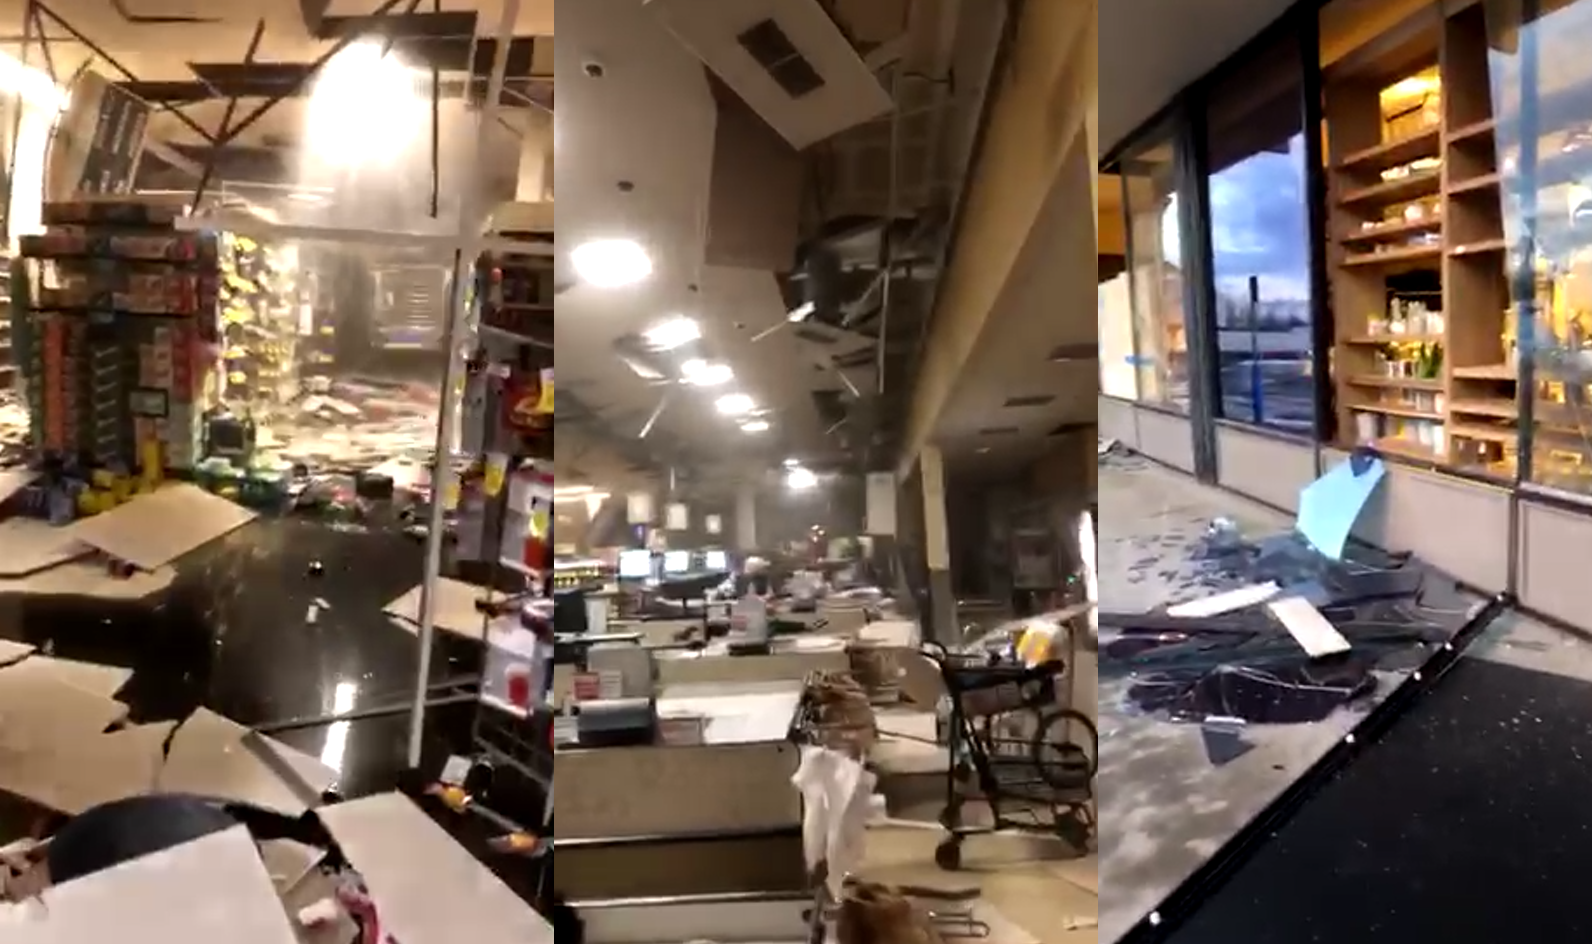 Alaska Grocery Stores Re-Open Following A Day Of Damage, Some Still Closed